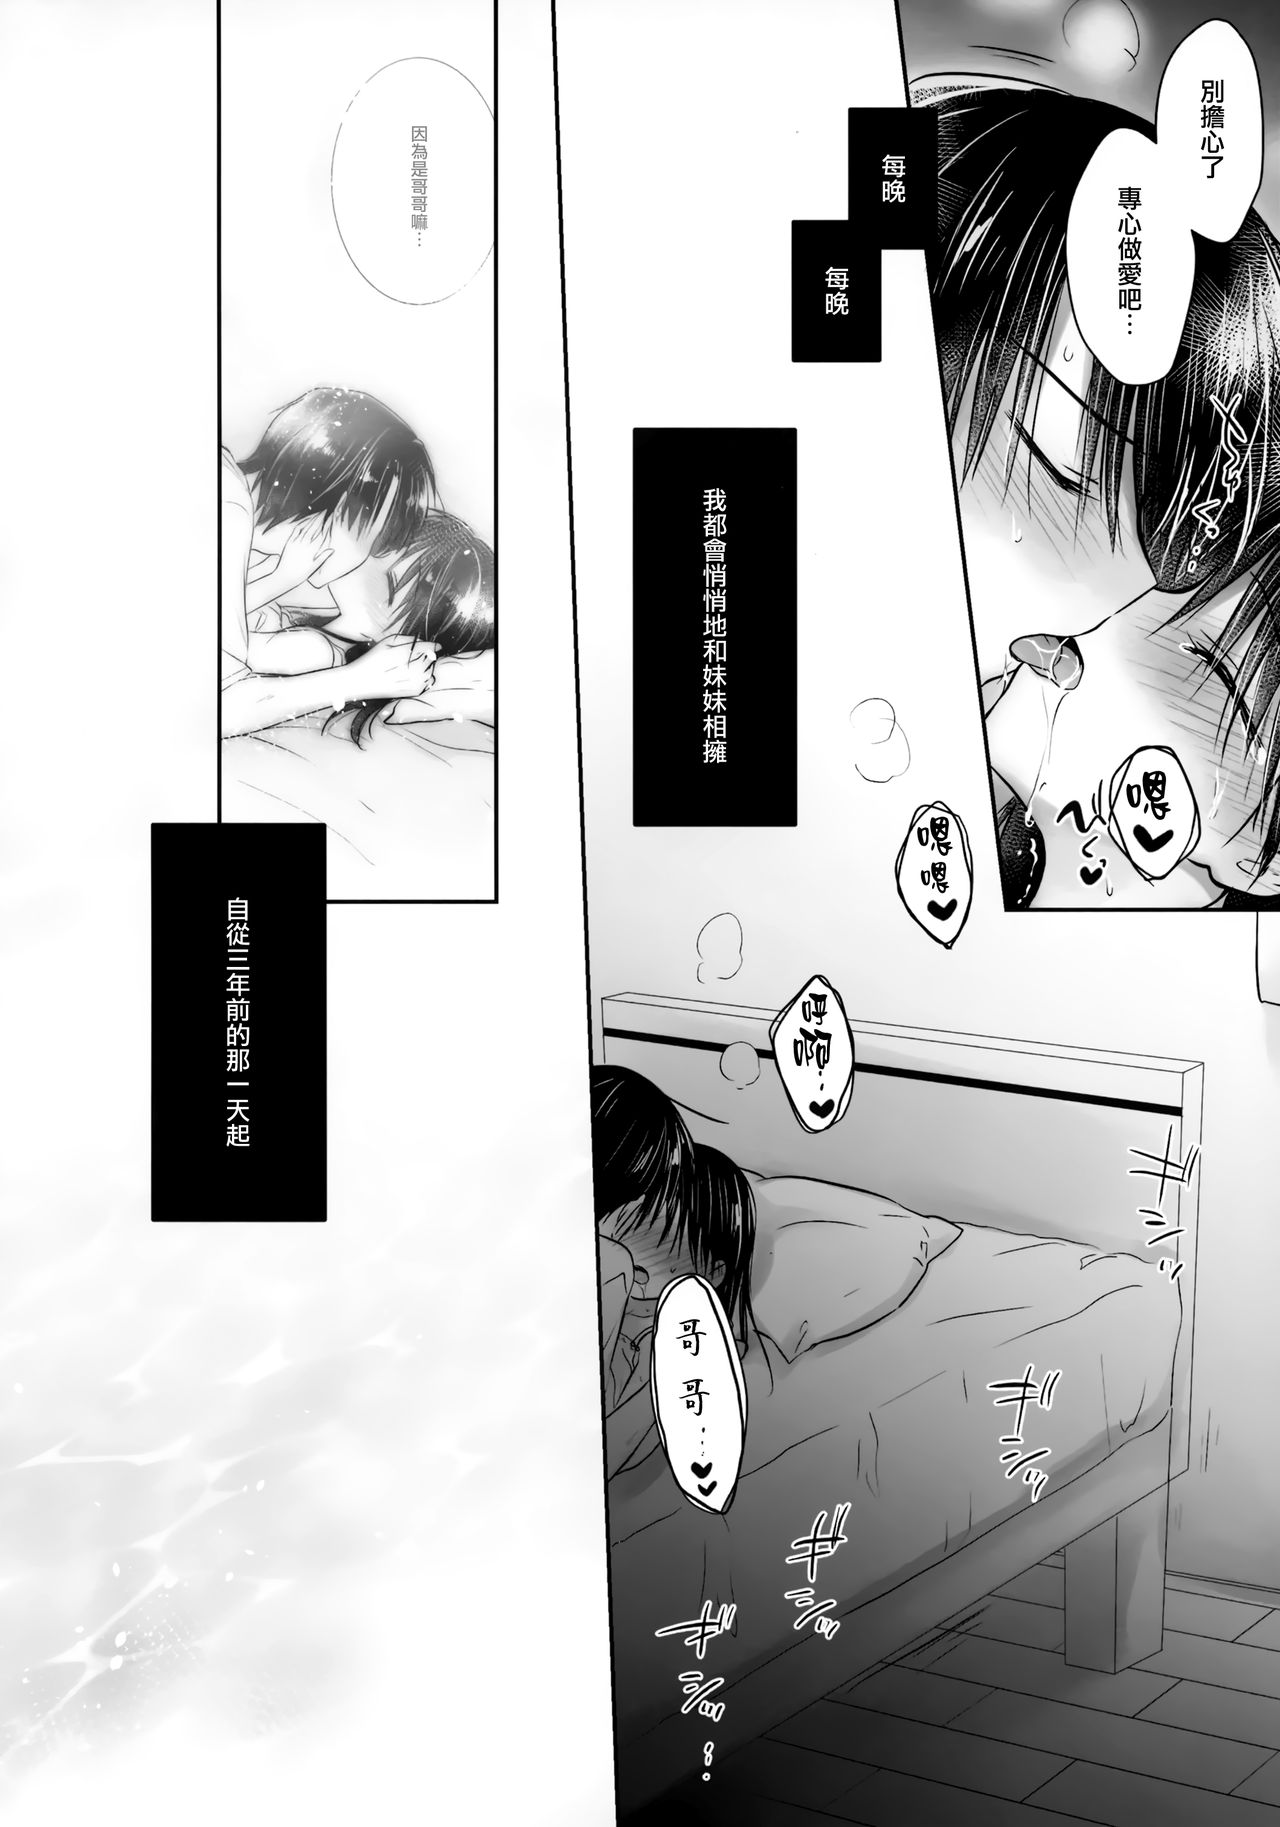 (C96) [Aquadrop (Mikami Mika)] Omoide Sex [Chinese] [山樱汉化] page 7 full